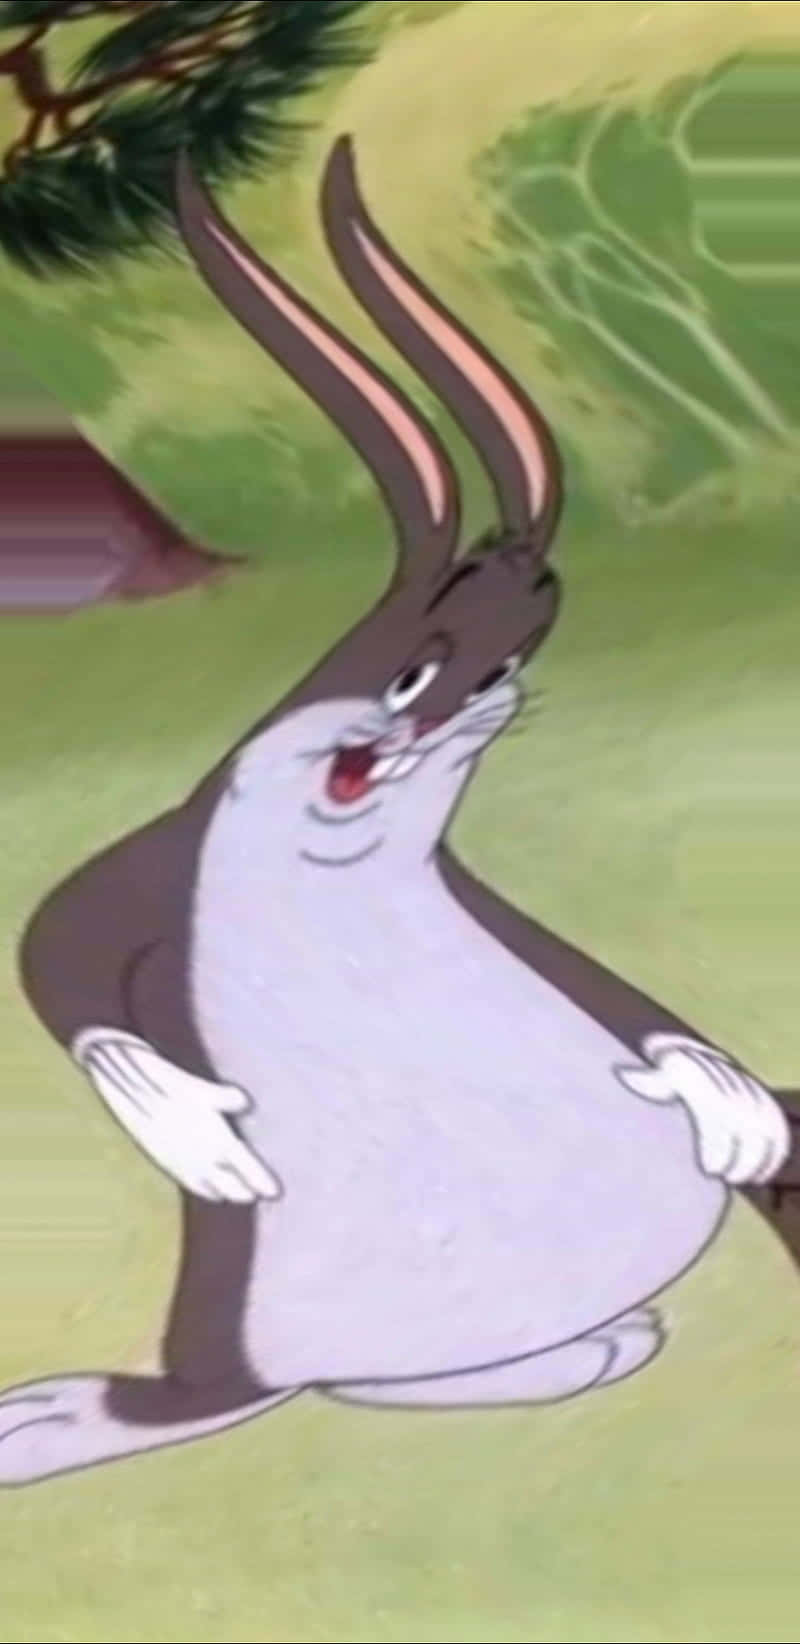 "Big Chungus, the biggest and cutest video game character!" Wallpaper